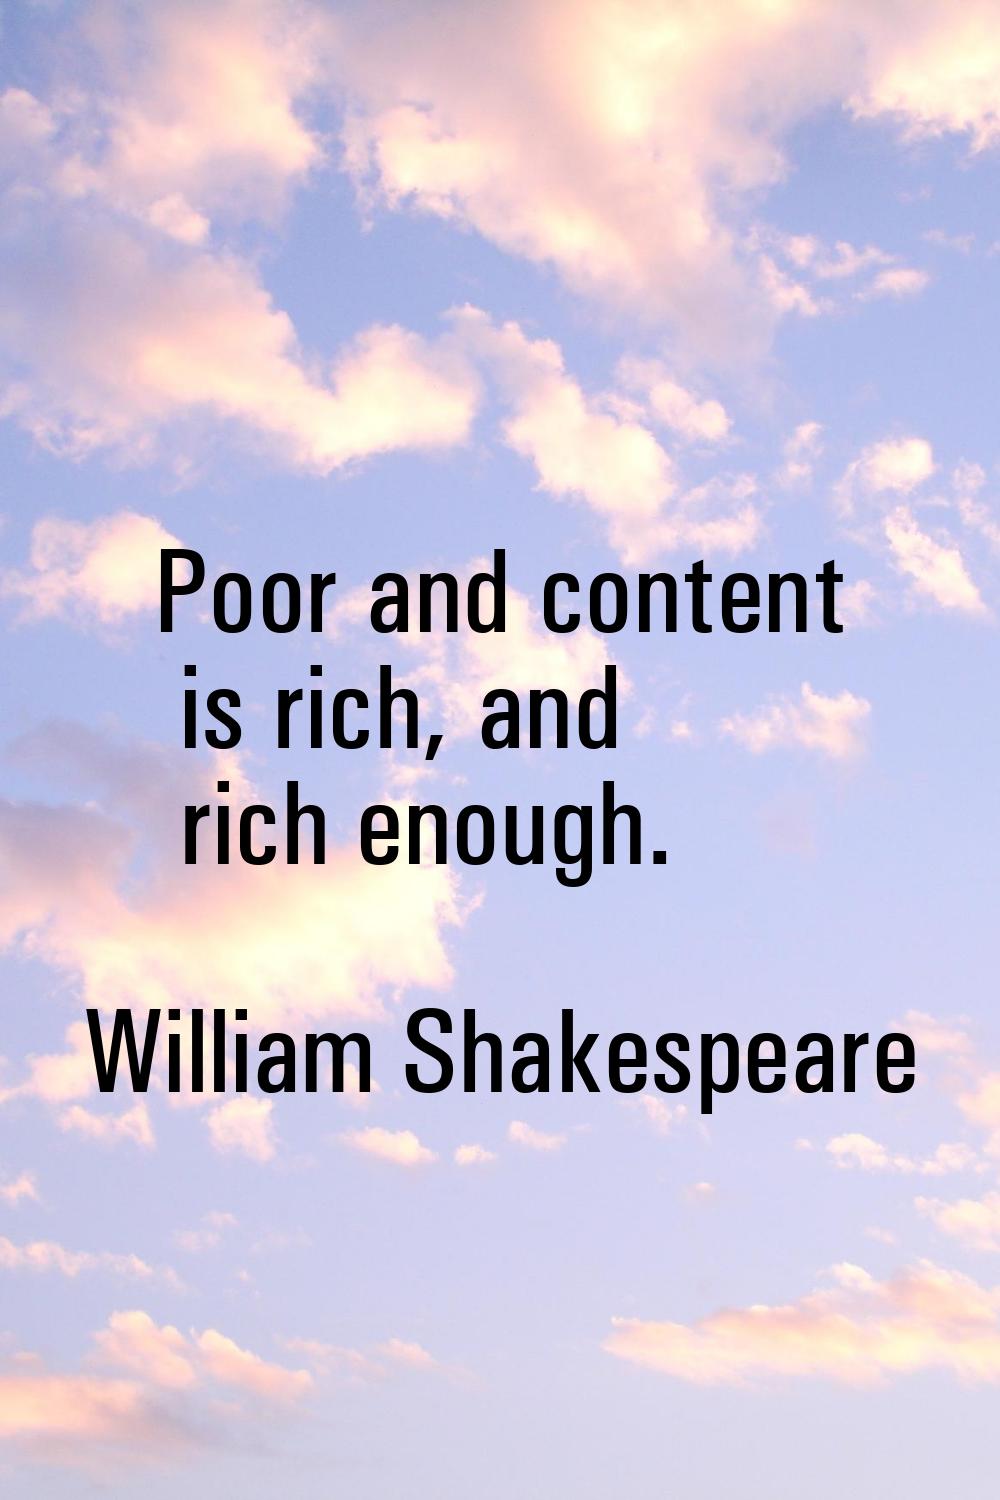 Poor and content is rich, and rich enough.